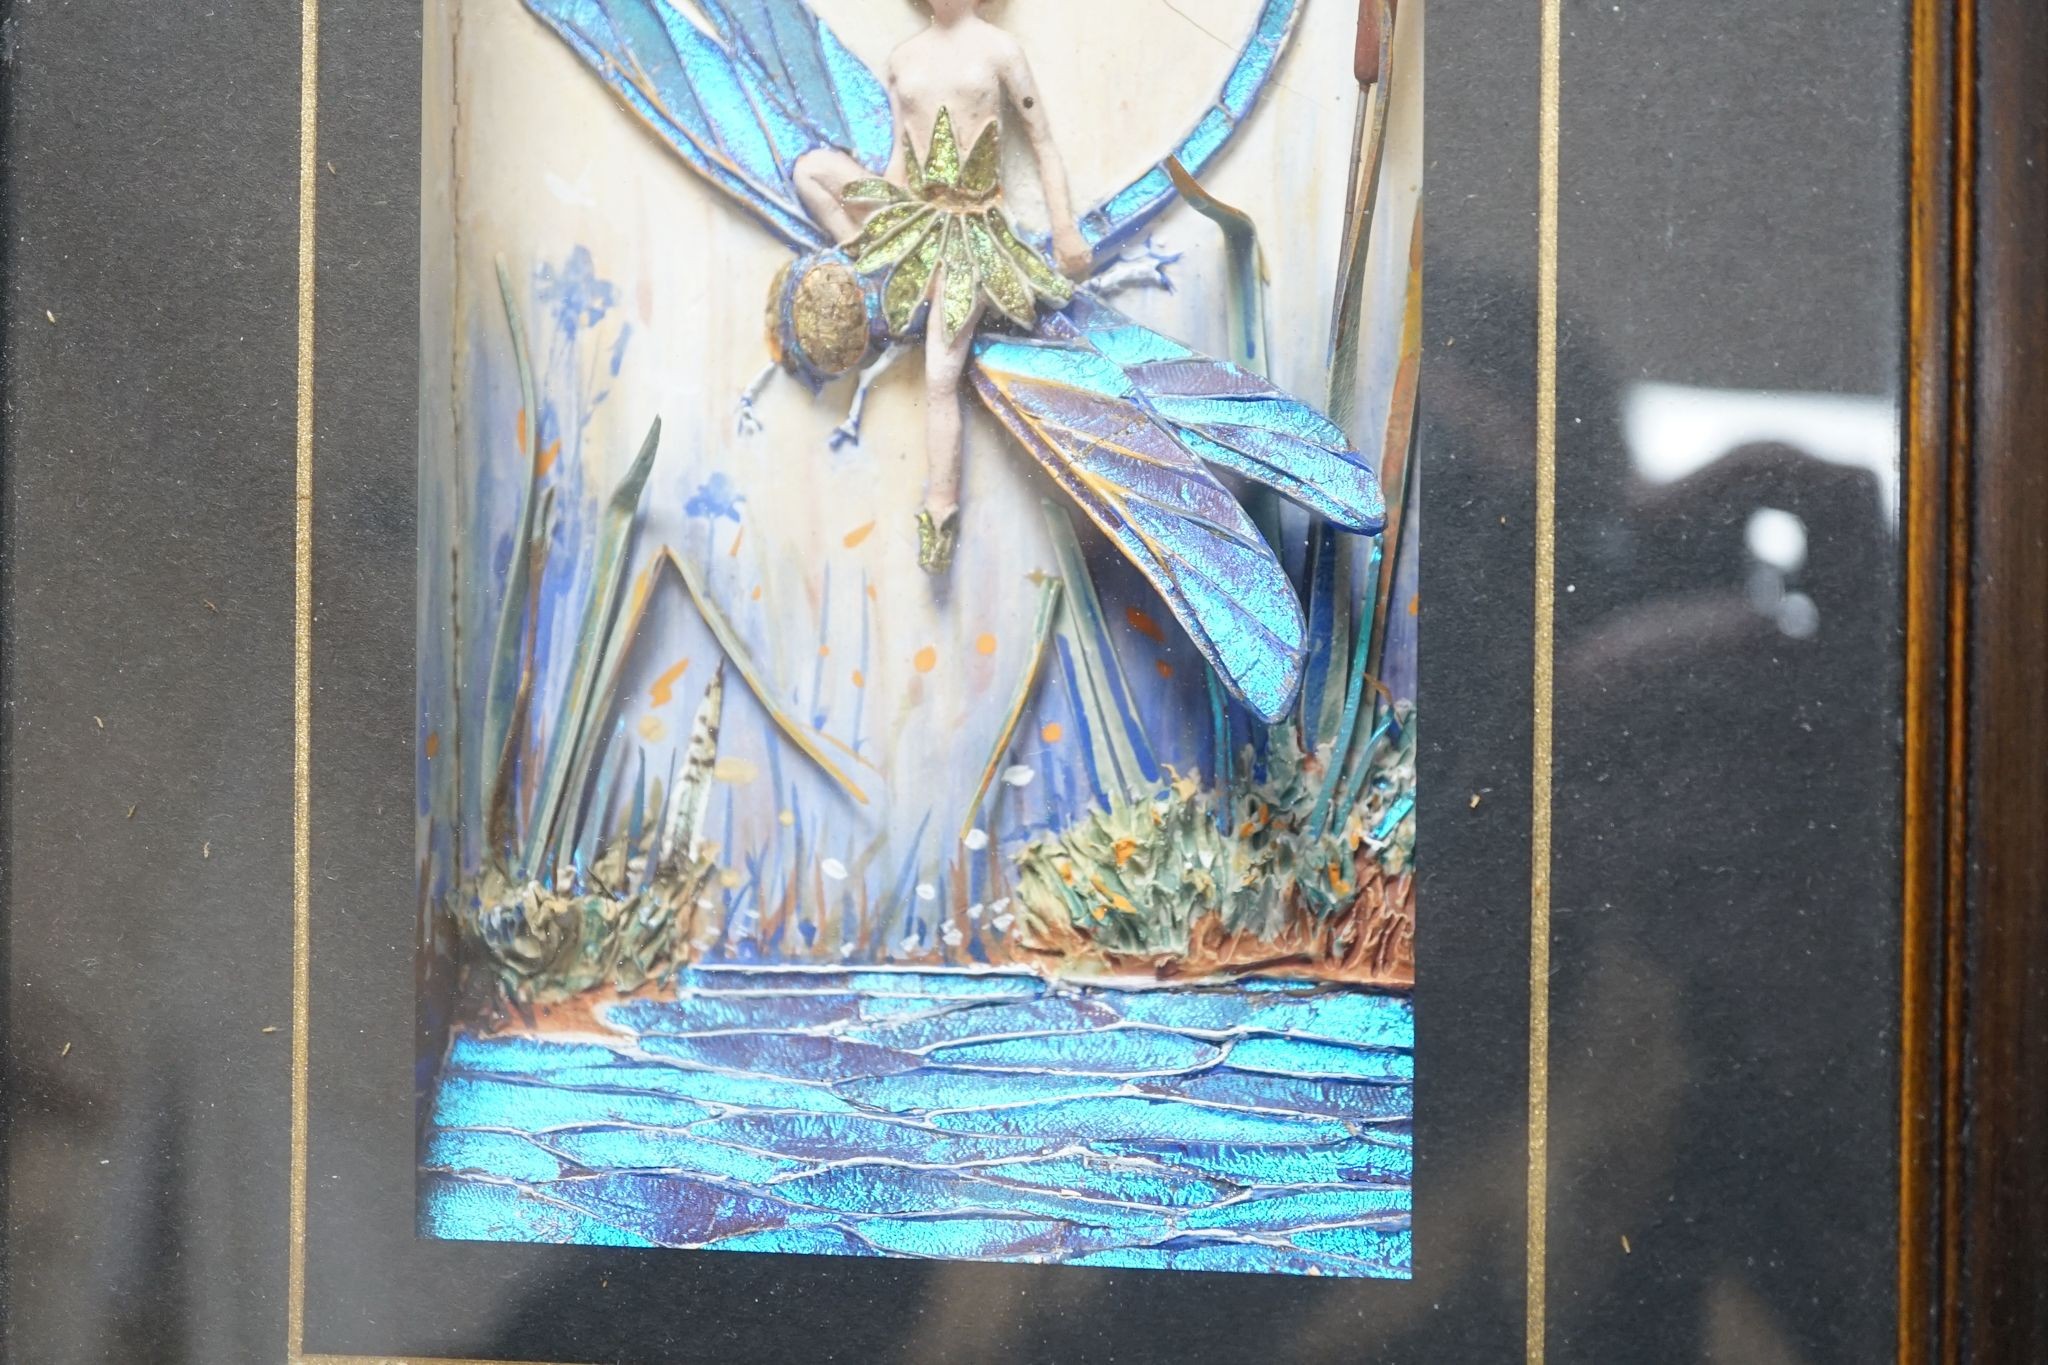 A pair of morpho butterfly wing nymph diorama, signed Gaydon King, Pat. App. For 19907/29, c.1930, 10.5 cms wide x 17.5 cms high. (not including mount or frame).